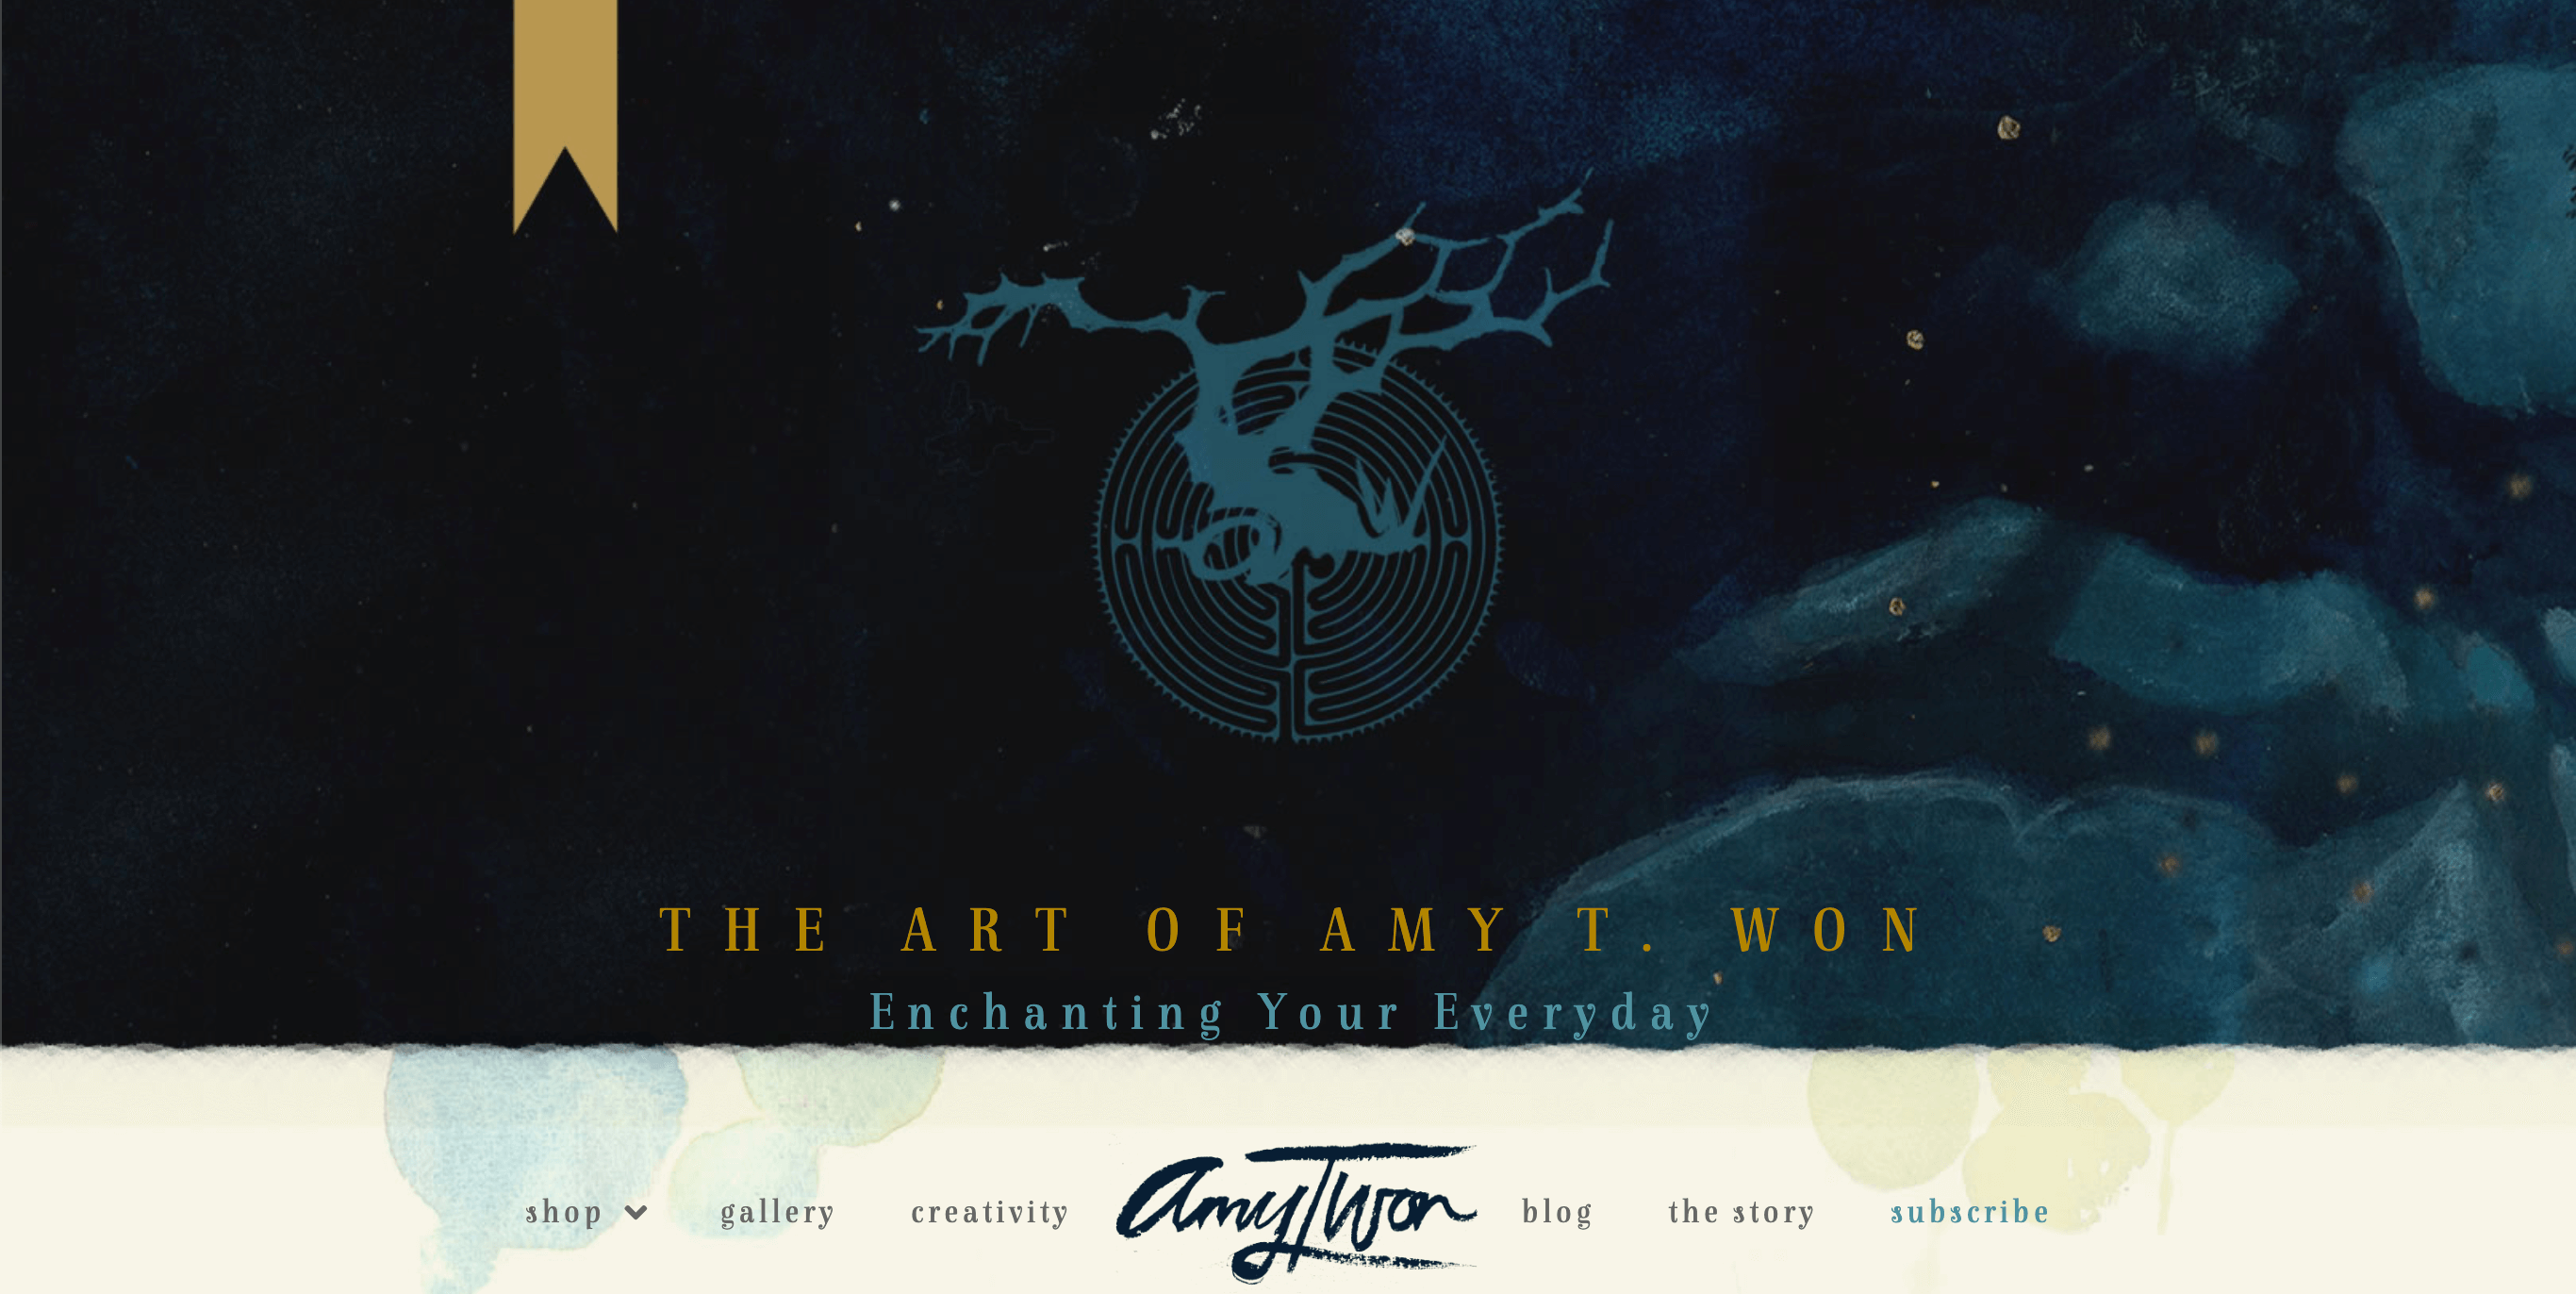 Amy T. Won's homepage